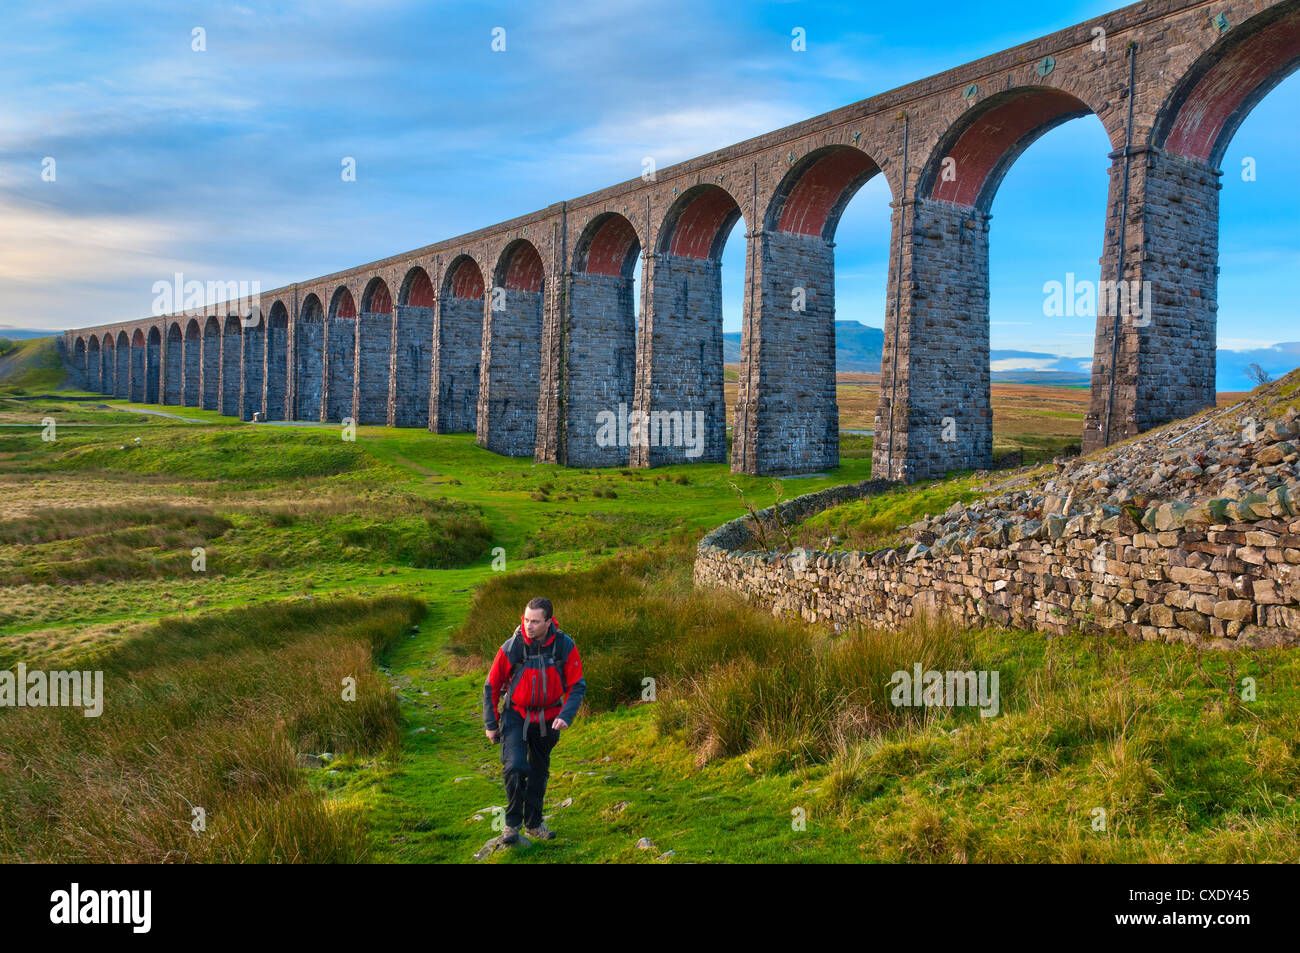 Pen-y-ghent and Ribblehead Viaduct on Settle to Carlisle Railway, Yorkshire Dales National Park, North Yorkshire, England, UK Stock Photo